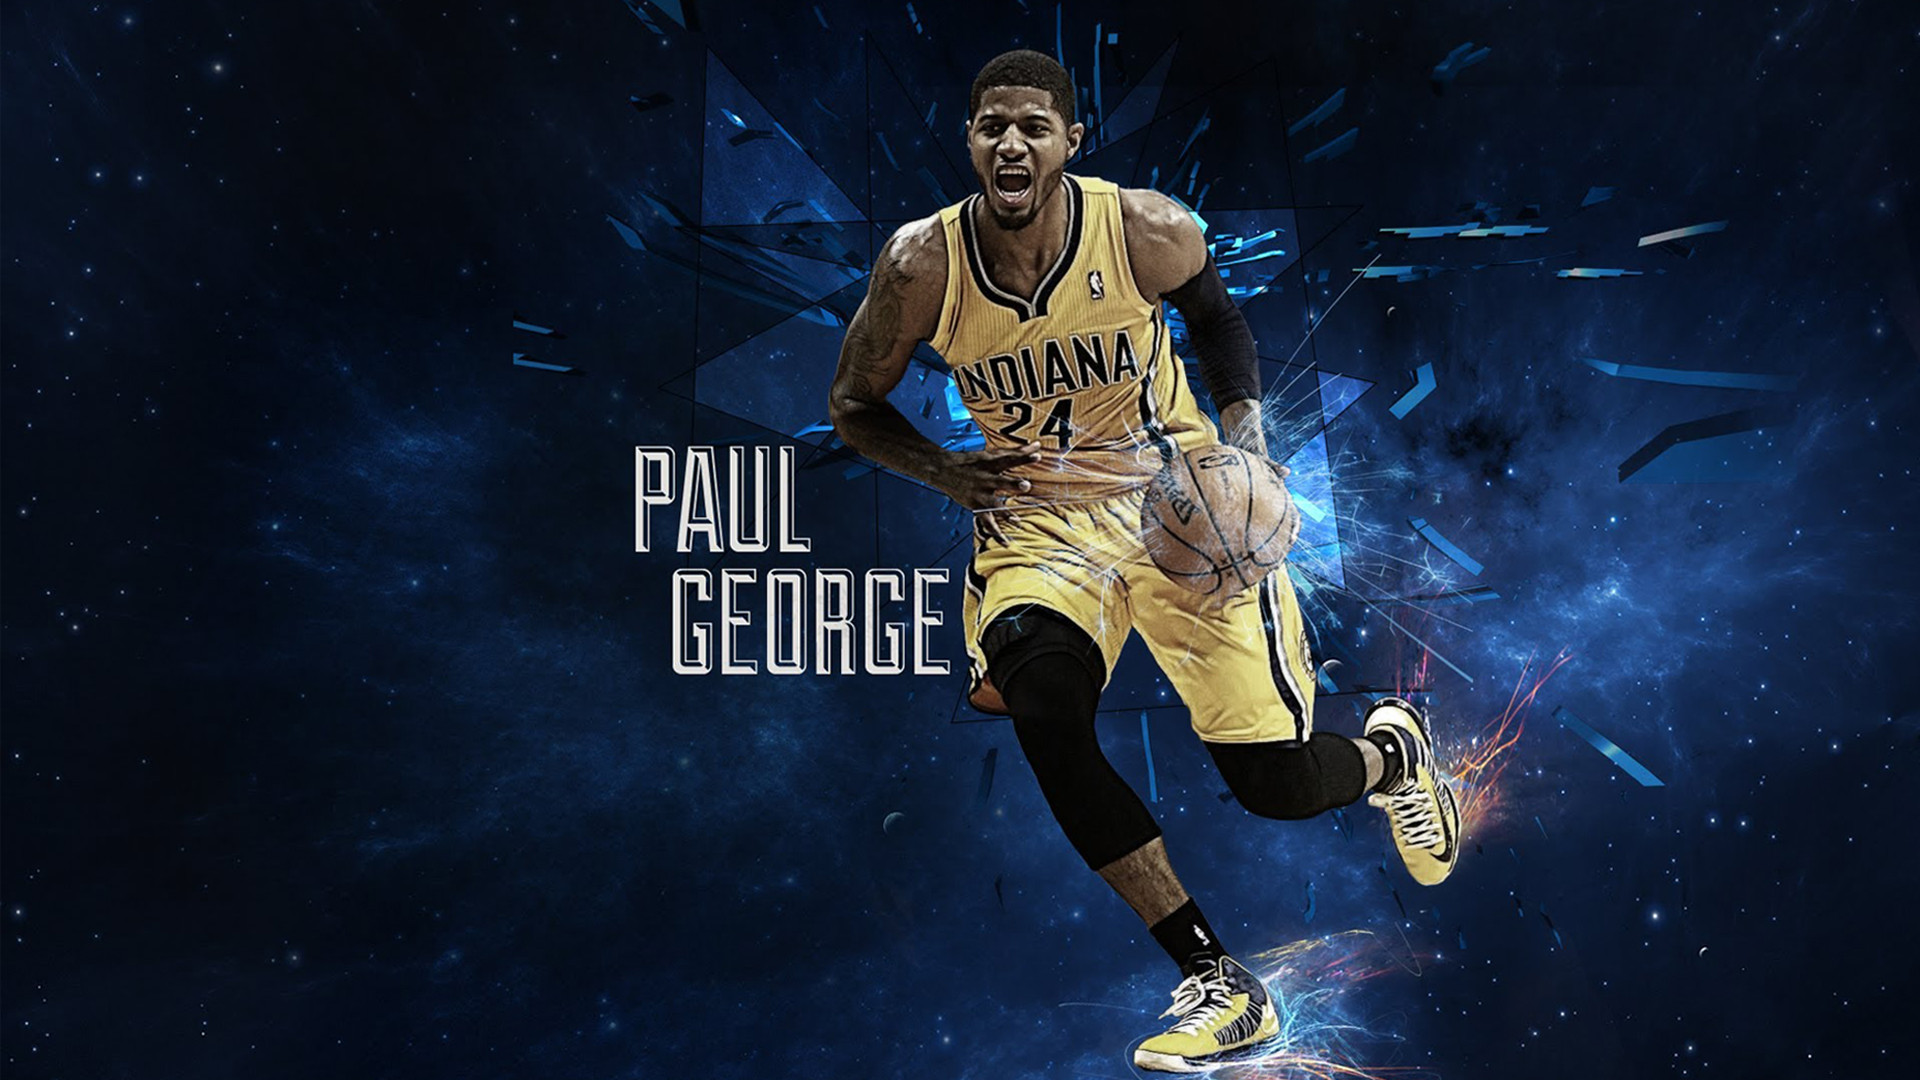 1920x1080 paul george indiana pacers nba players hd wallpaper free hd wallpapers high  definition amazing cool desktop wallpapers for windows tablet download free  ...